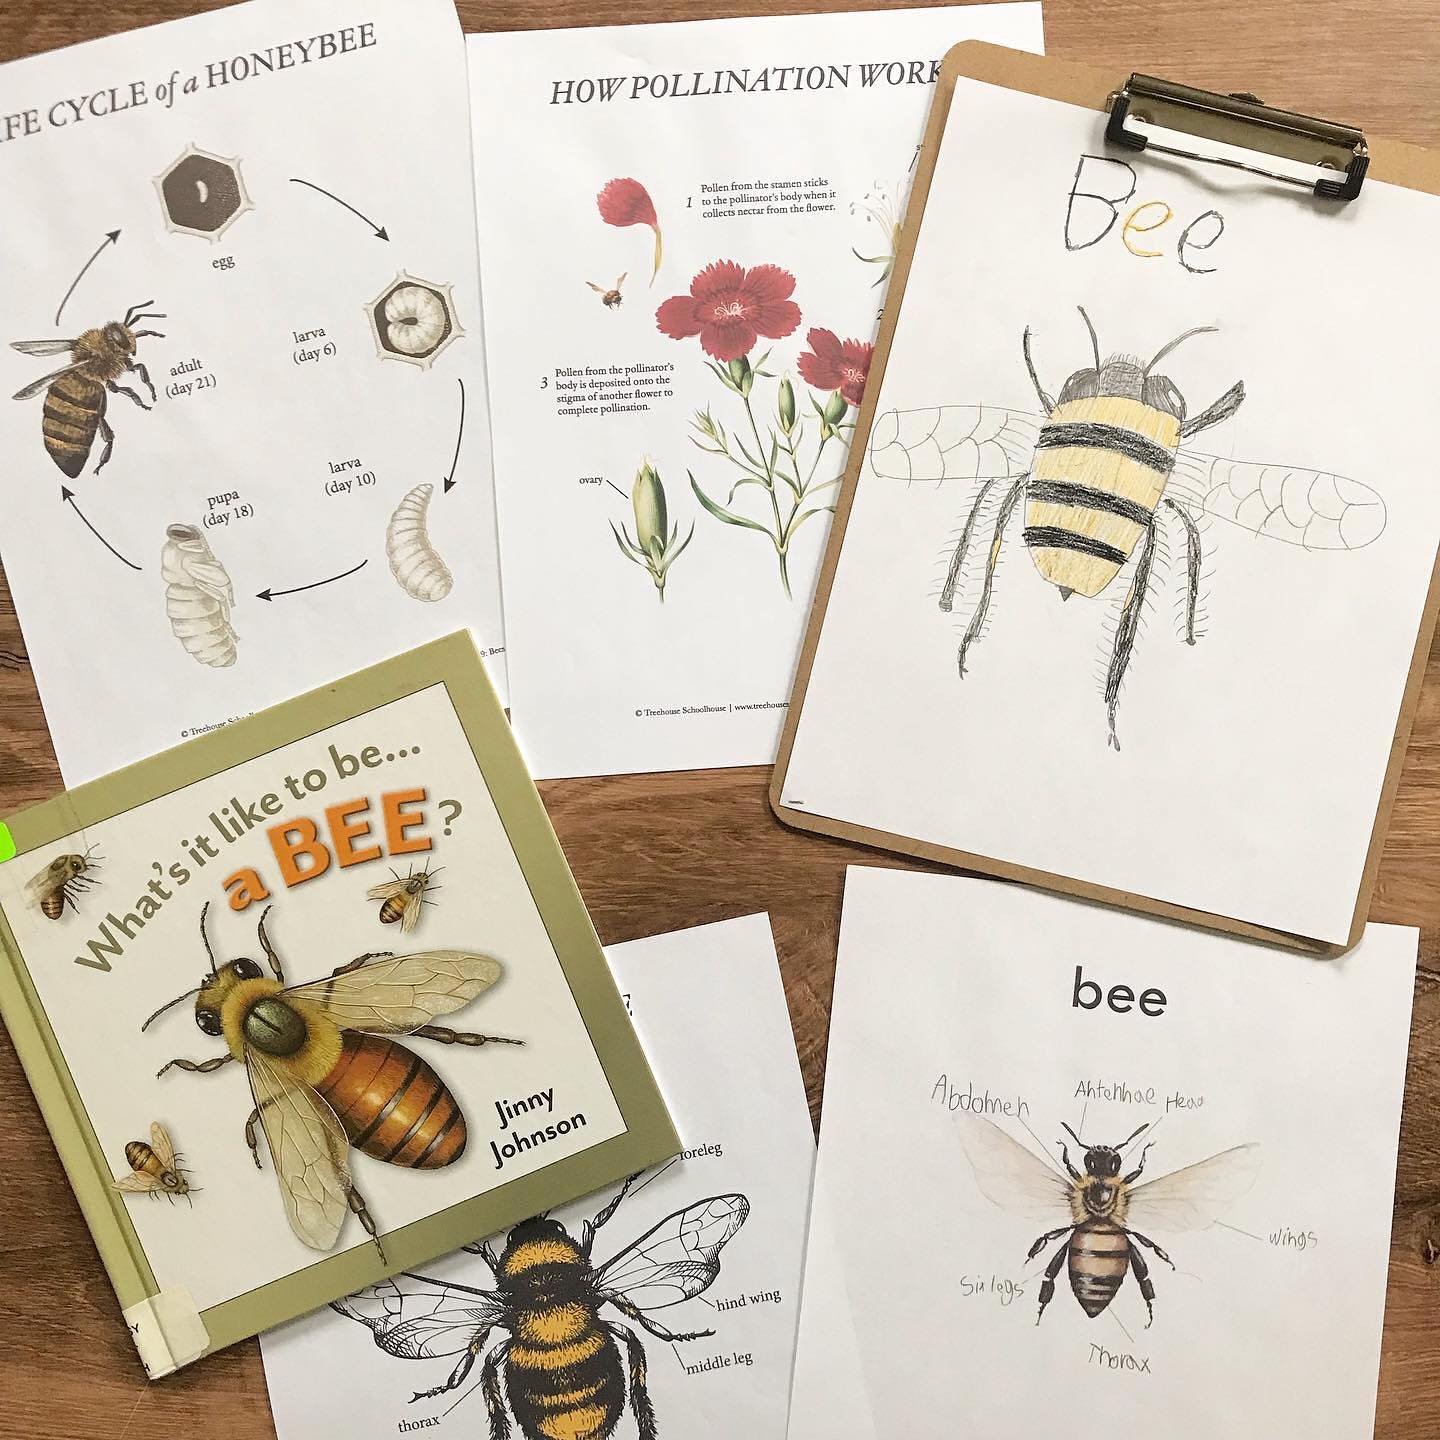 Homeschool Recap: This week for our nature study we focused on bees 🐝 We read all about these awesome little creatures, reviewed their life cycle and anatomy, as well as pollination. Then Elliot did his tangram puzzle and drew a bee for his nature j